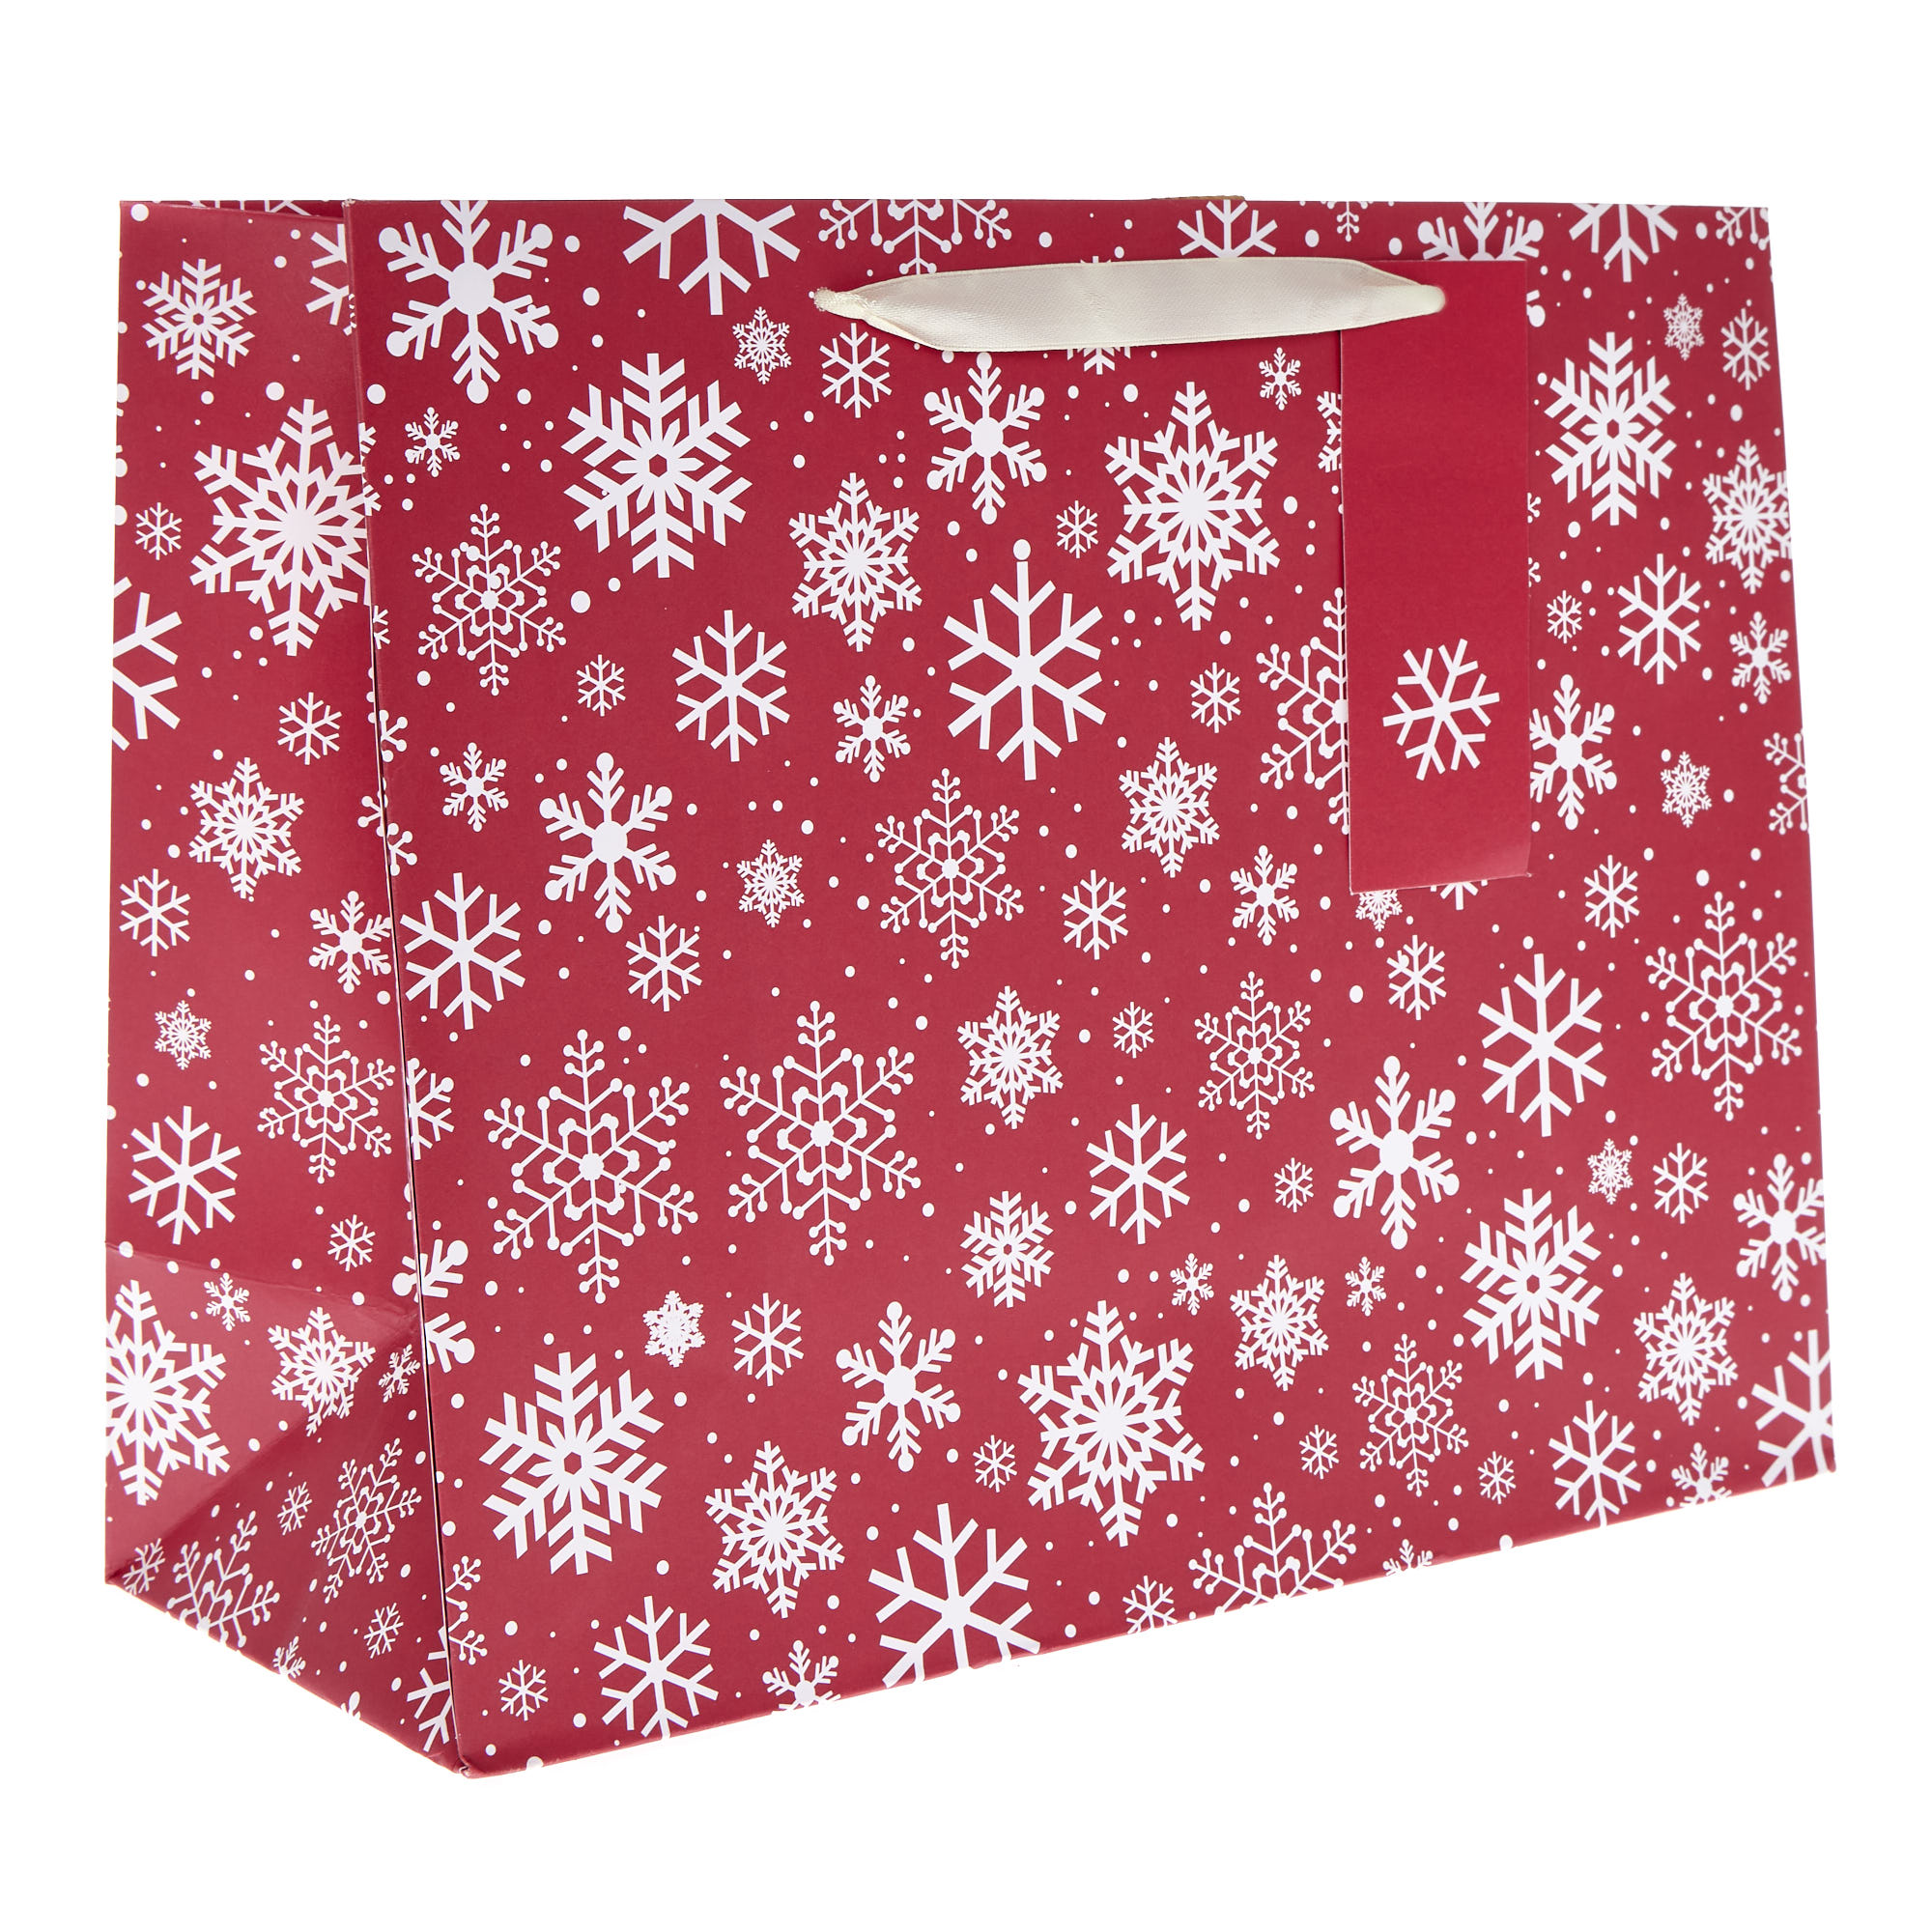 Large Landscape Red & White Snowflakes Gift Bag